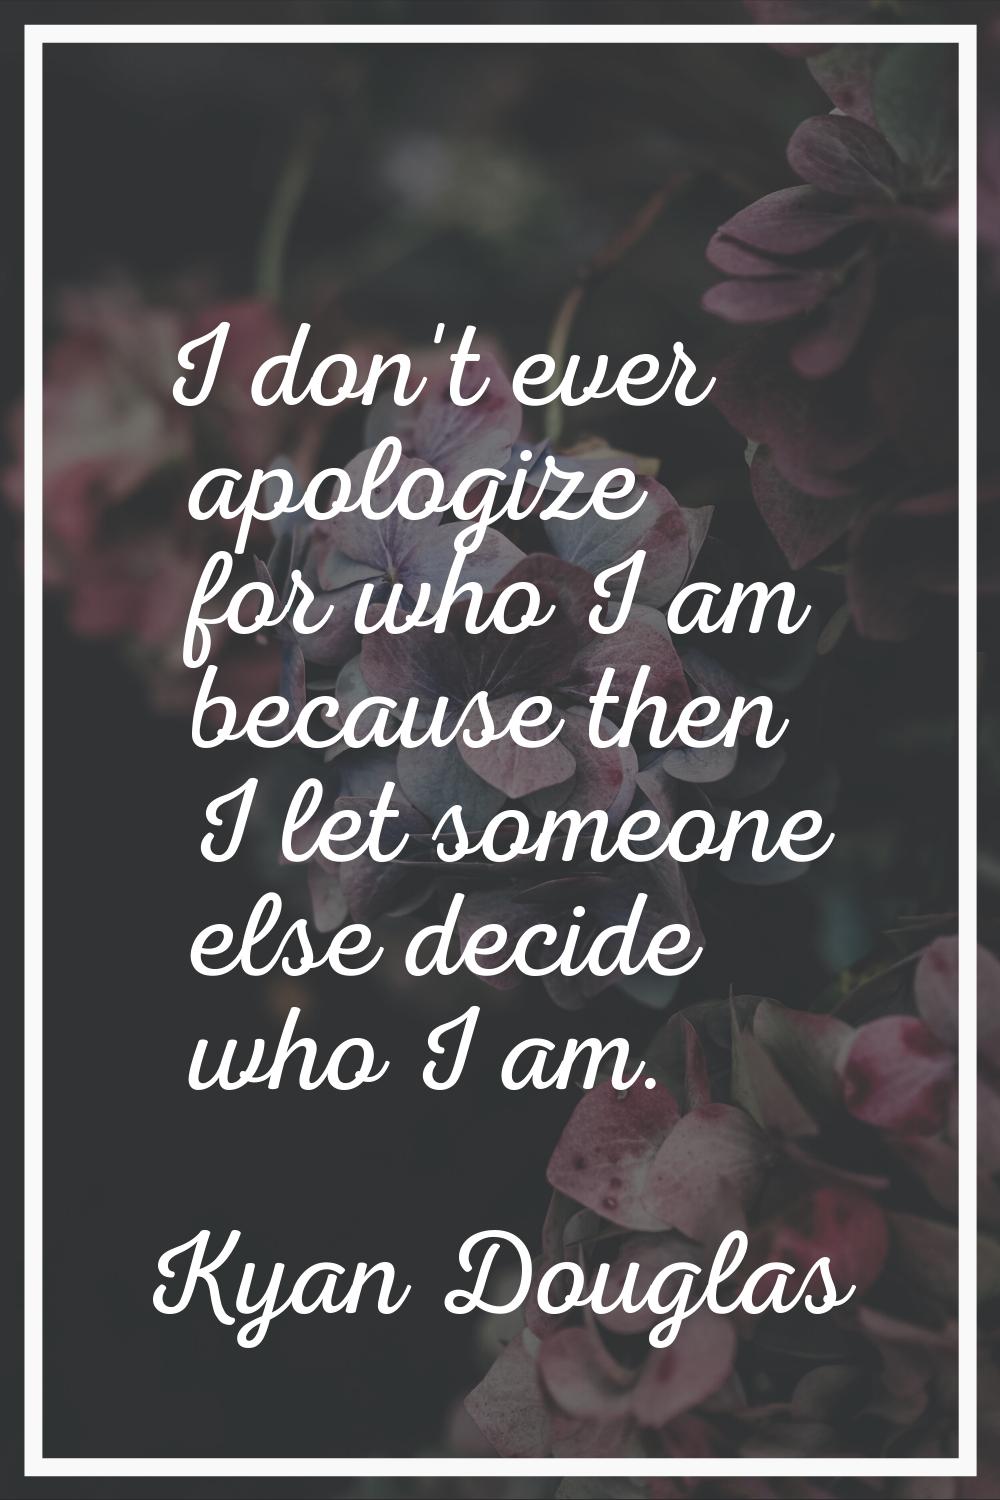 I don't ever apologize for who I am because then I let someone else decide who I am.